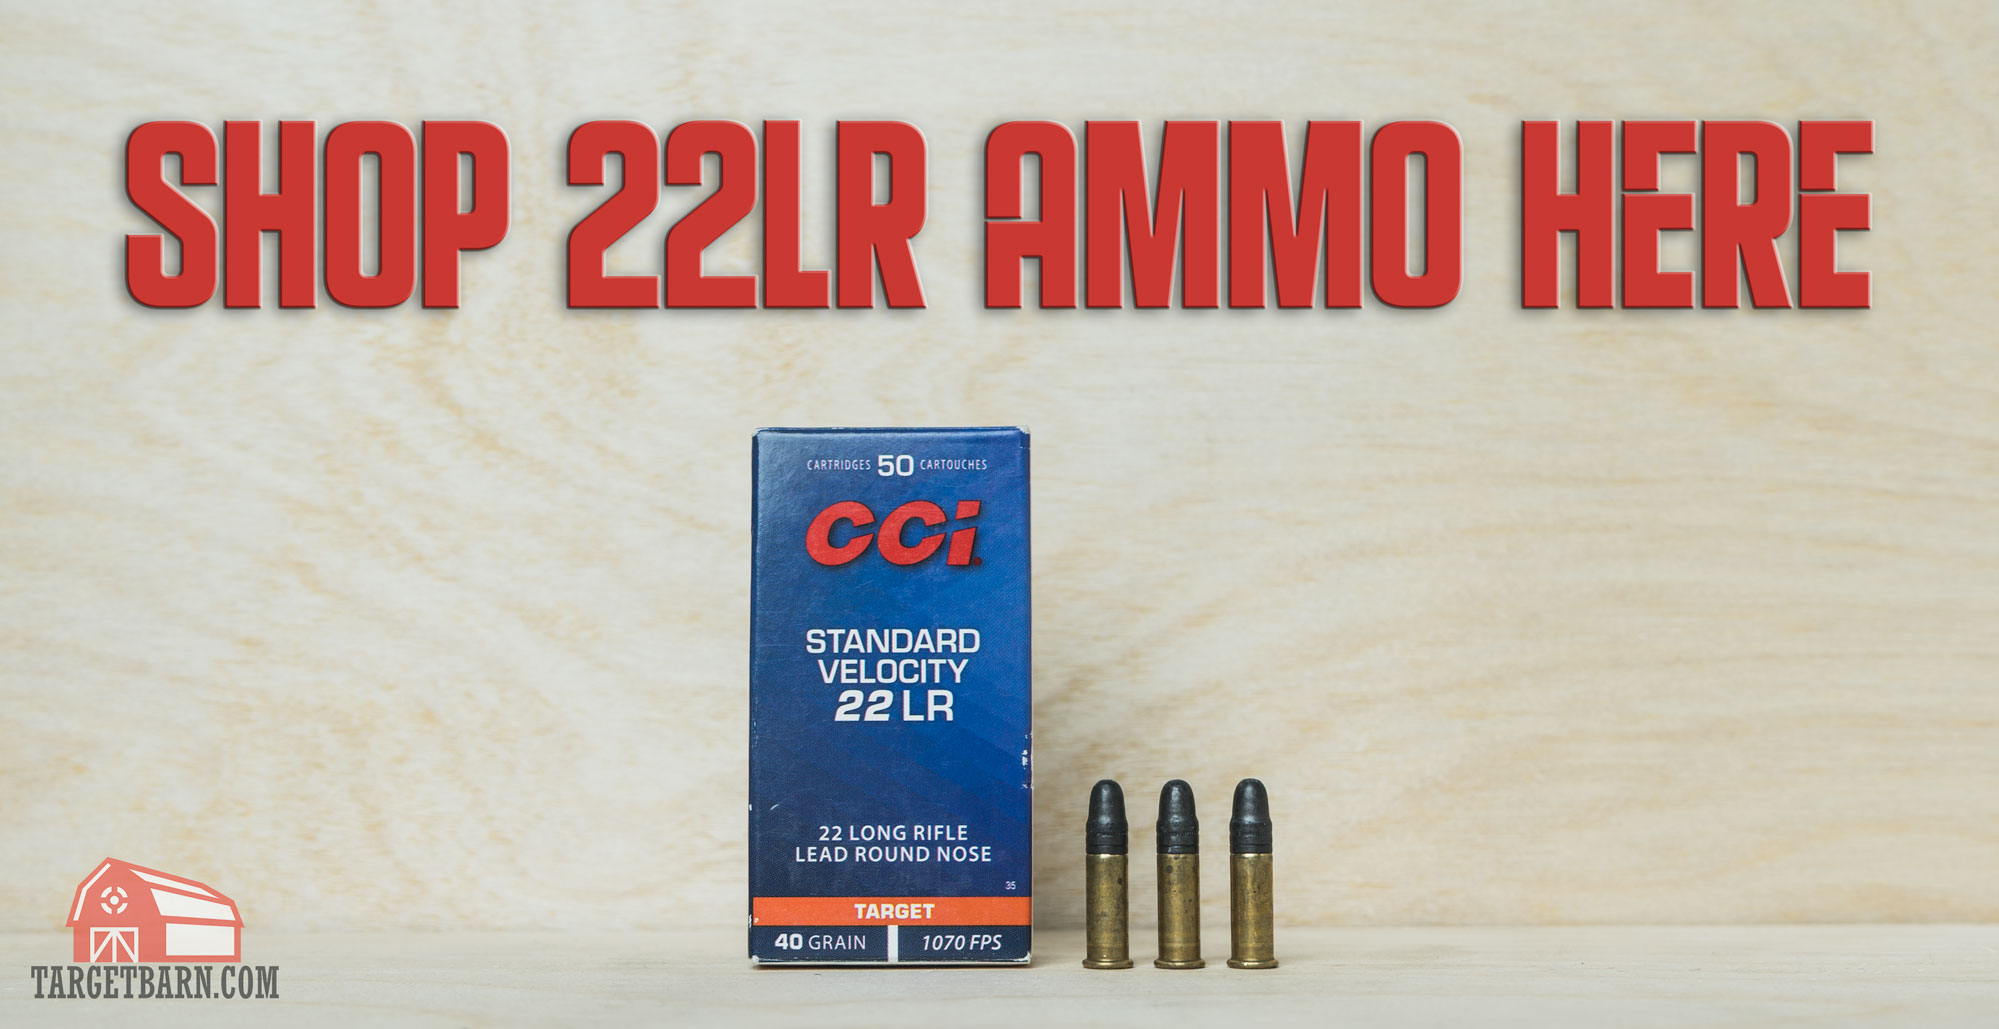 shop 22lr ammo here text over a box of cci 22lr ammo and three rounds